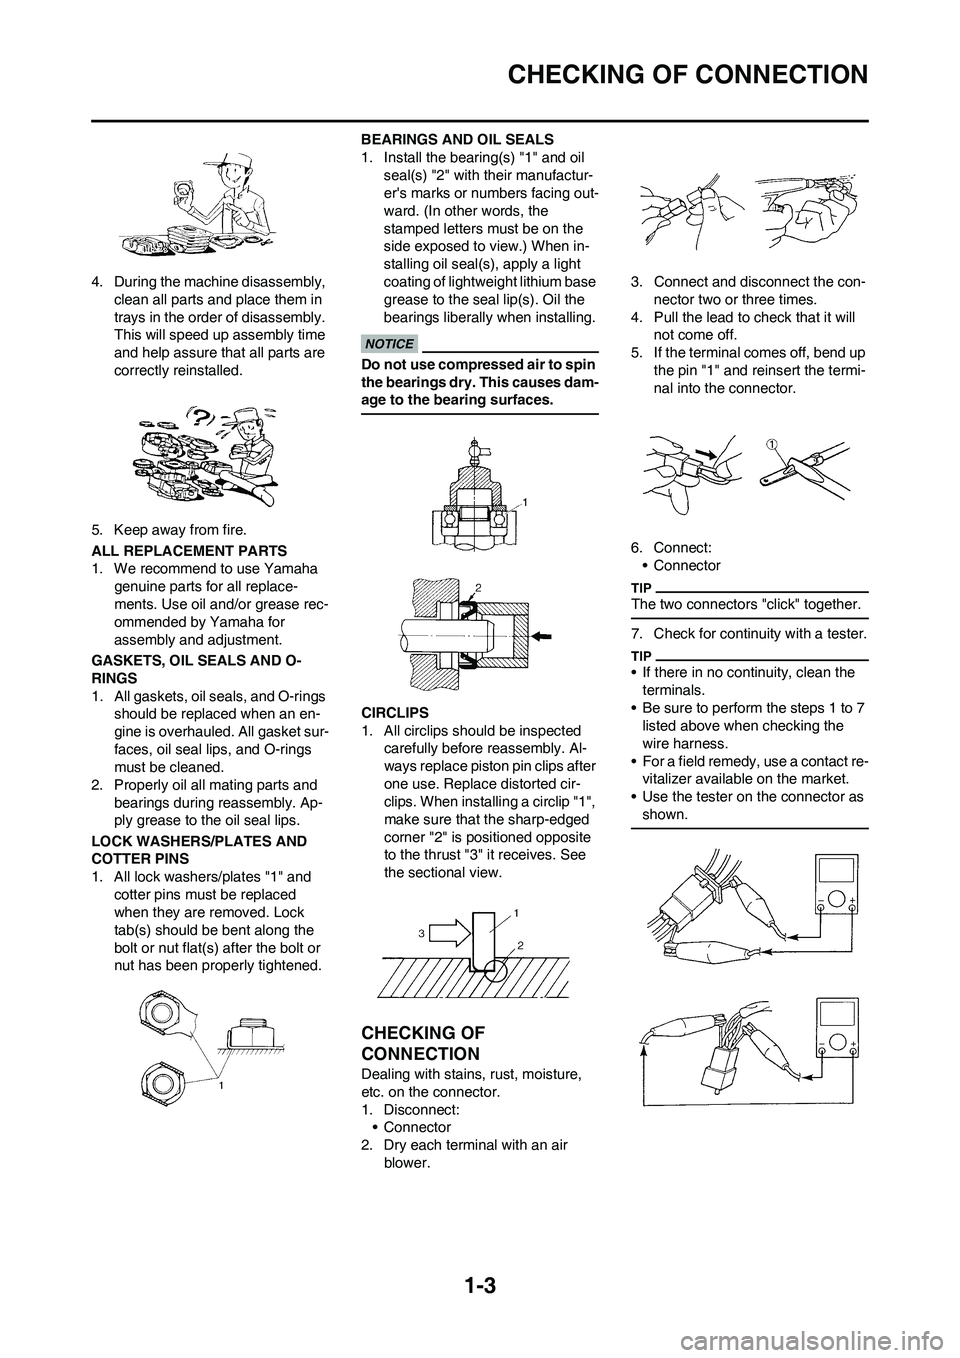 YAMAHA YZ450F 2009  Owners Manual 1-3
CHECKING OF CONNECTION
4. During the machine disassembly, 
clean all parts and place them in 
trays in the order of disassembly. 
This will speed up assembly time 
and help assure that all parts a